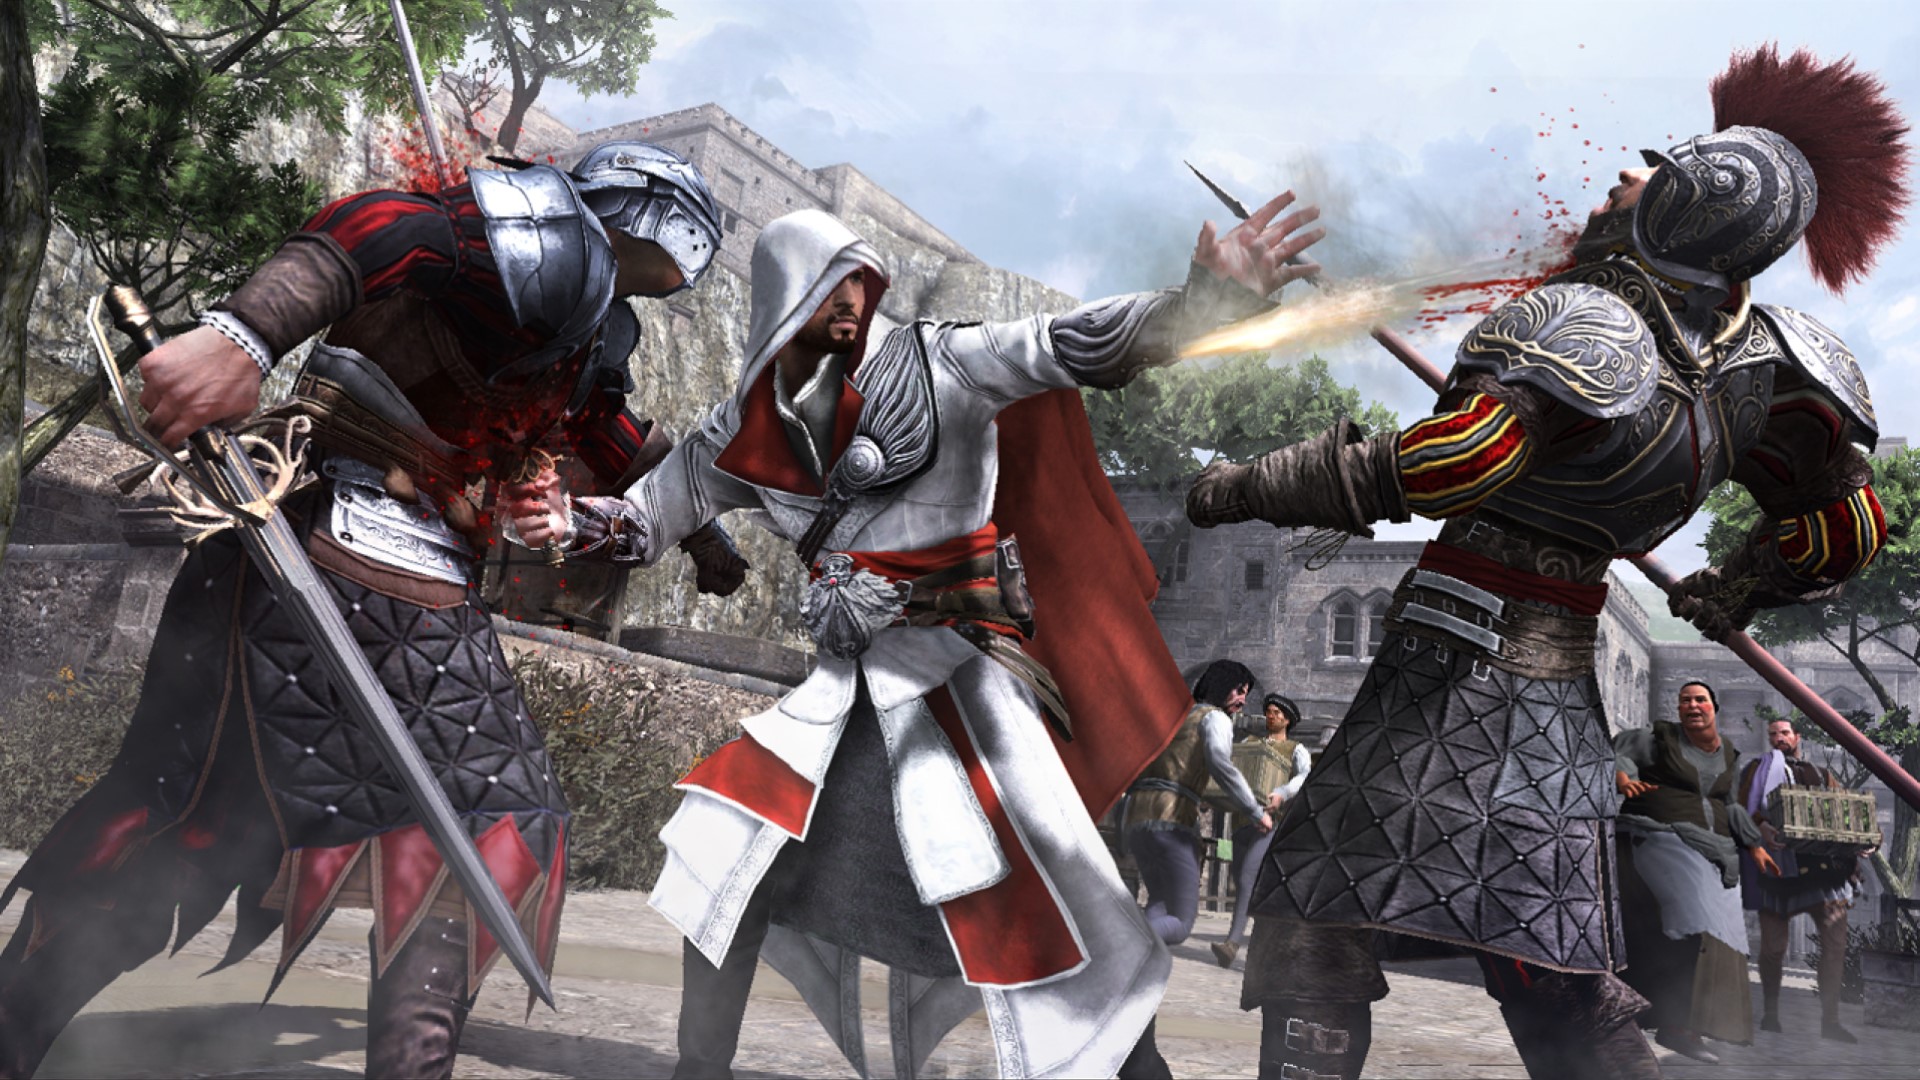 Assassin's Creed Brotherhood] 3rd out of 11 assassins creed games